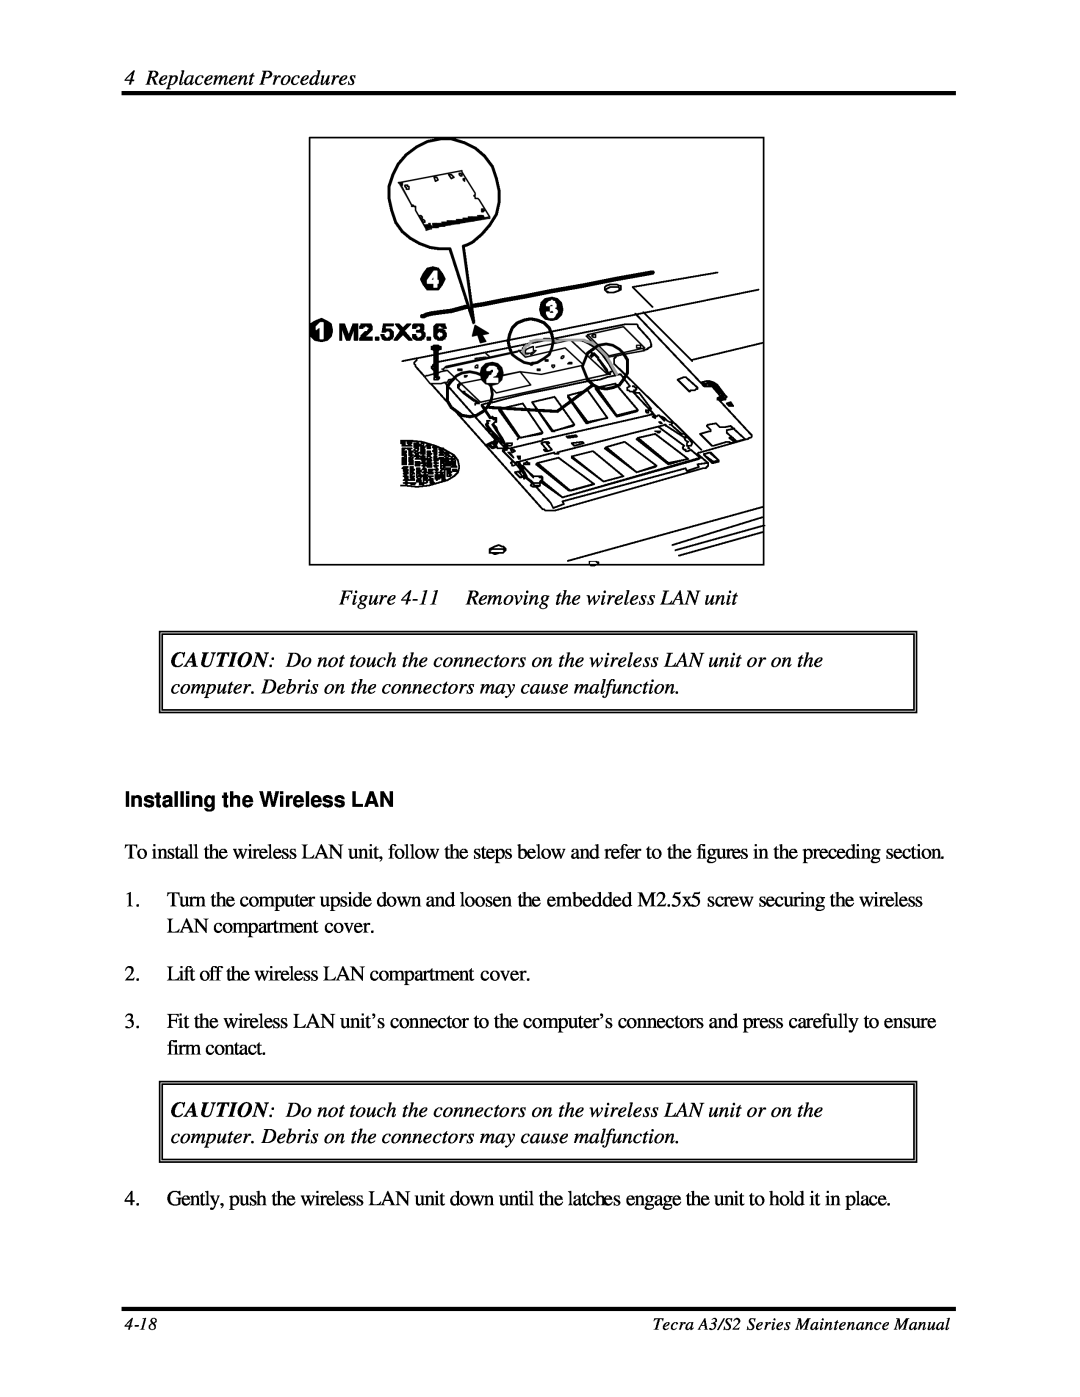 Toshiba S2 manual 11 Removing the wireless LAN unit, Installing the Wireless LAN, Replacement Procedures 